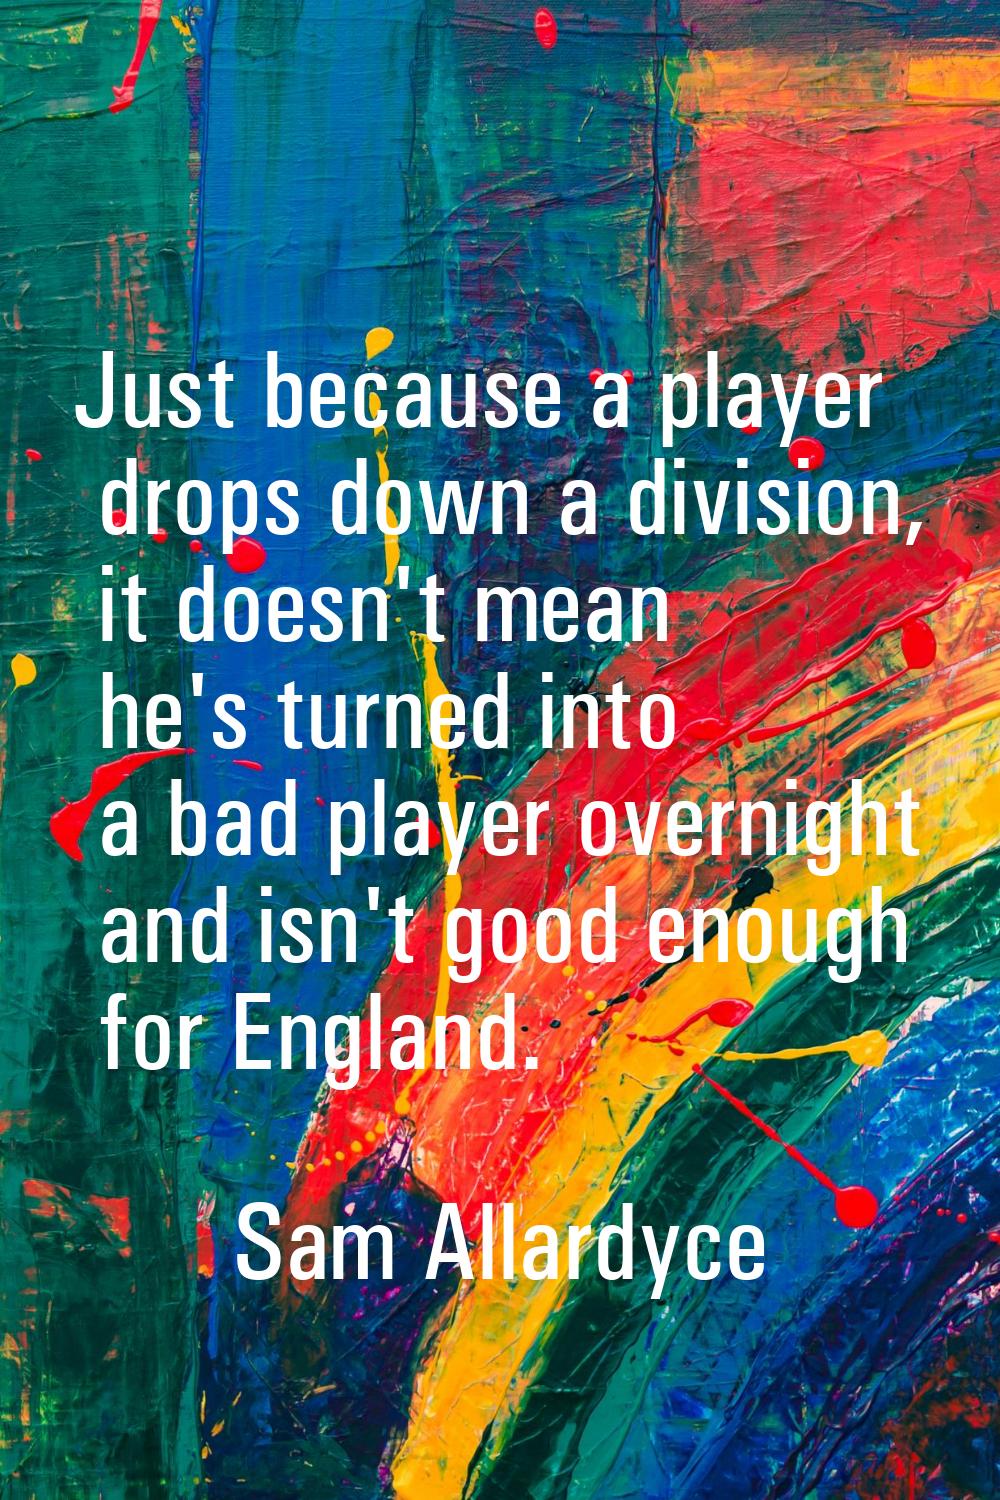 Just because a player drops down a division, it doesn't mean he's turned into a bad player overnigh